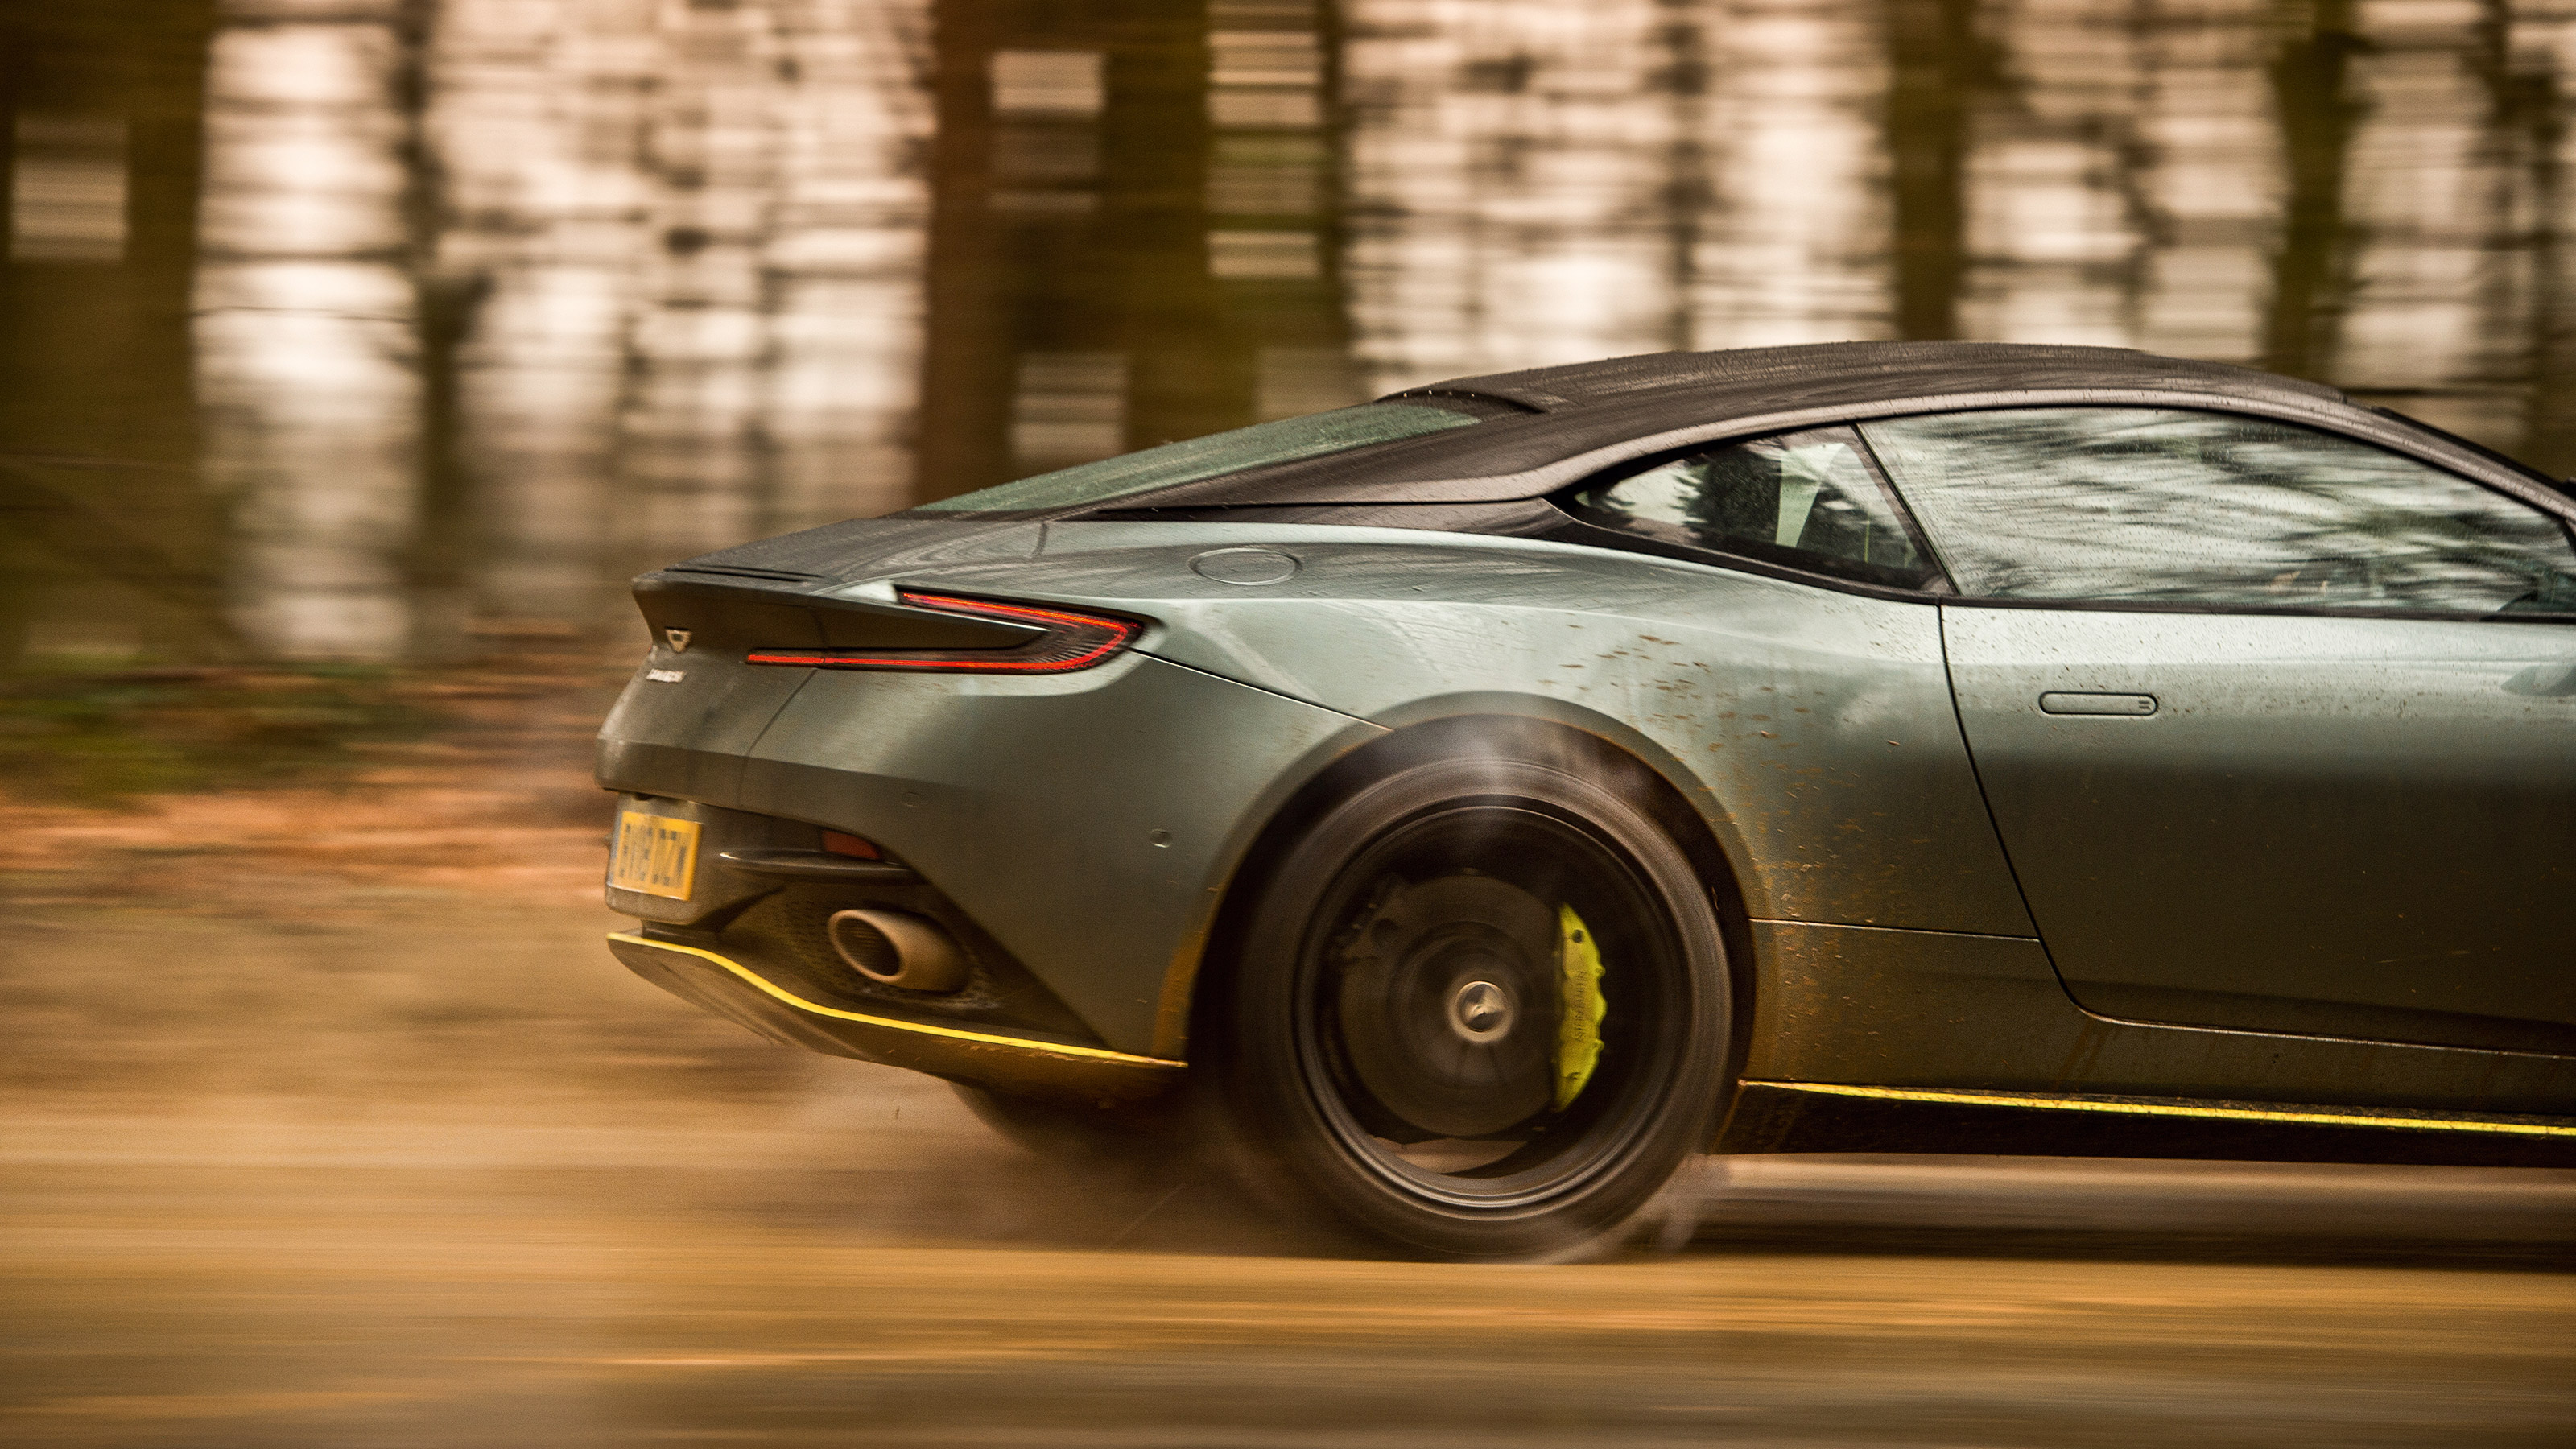 2020 Aston Martin Db11 Amr Review - A Better Car, But Is It A Better Db11?  | Evo